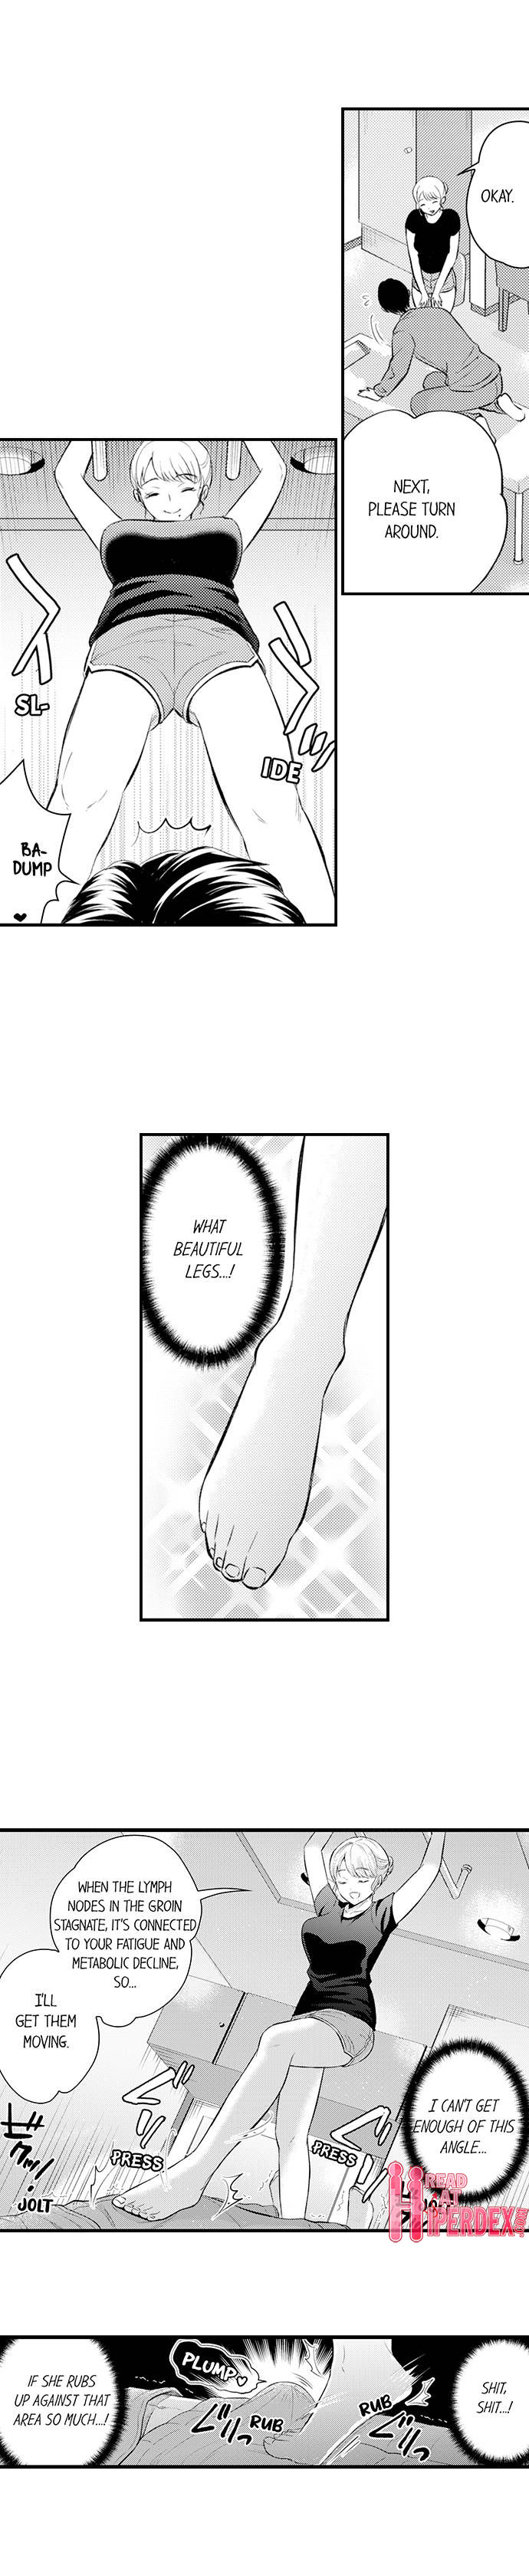 The Massage ♂♀ The Pleasure of Full Course Sex Chapter 9 - Page 4